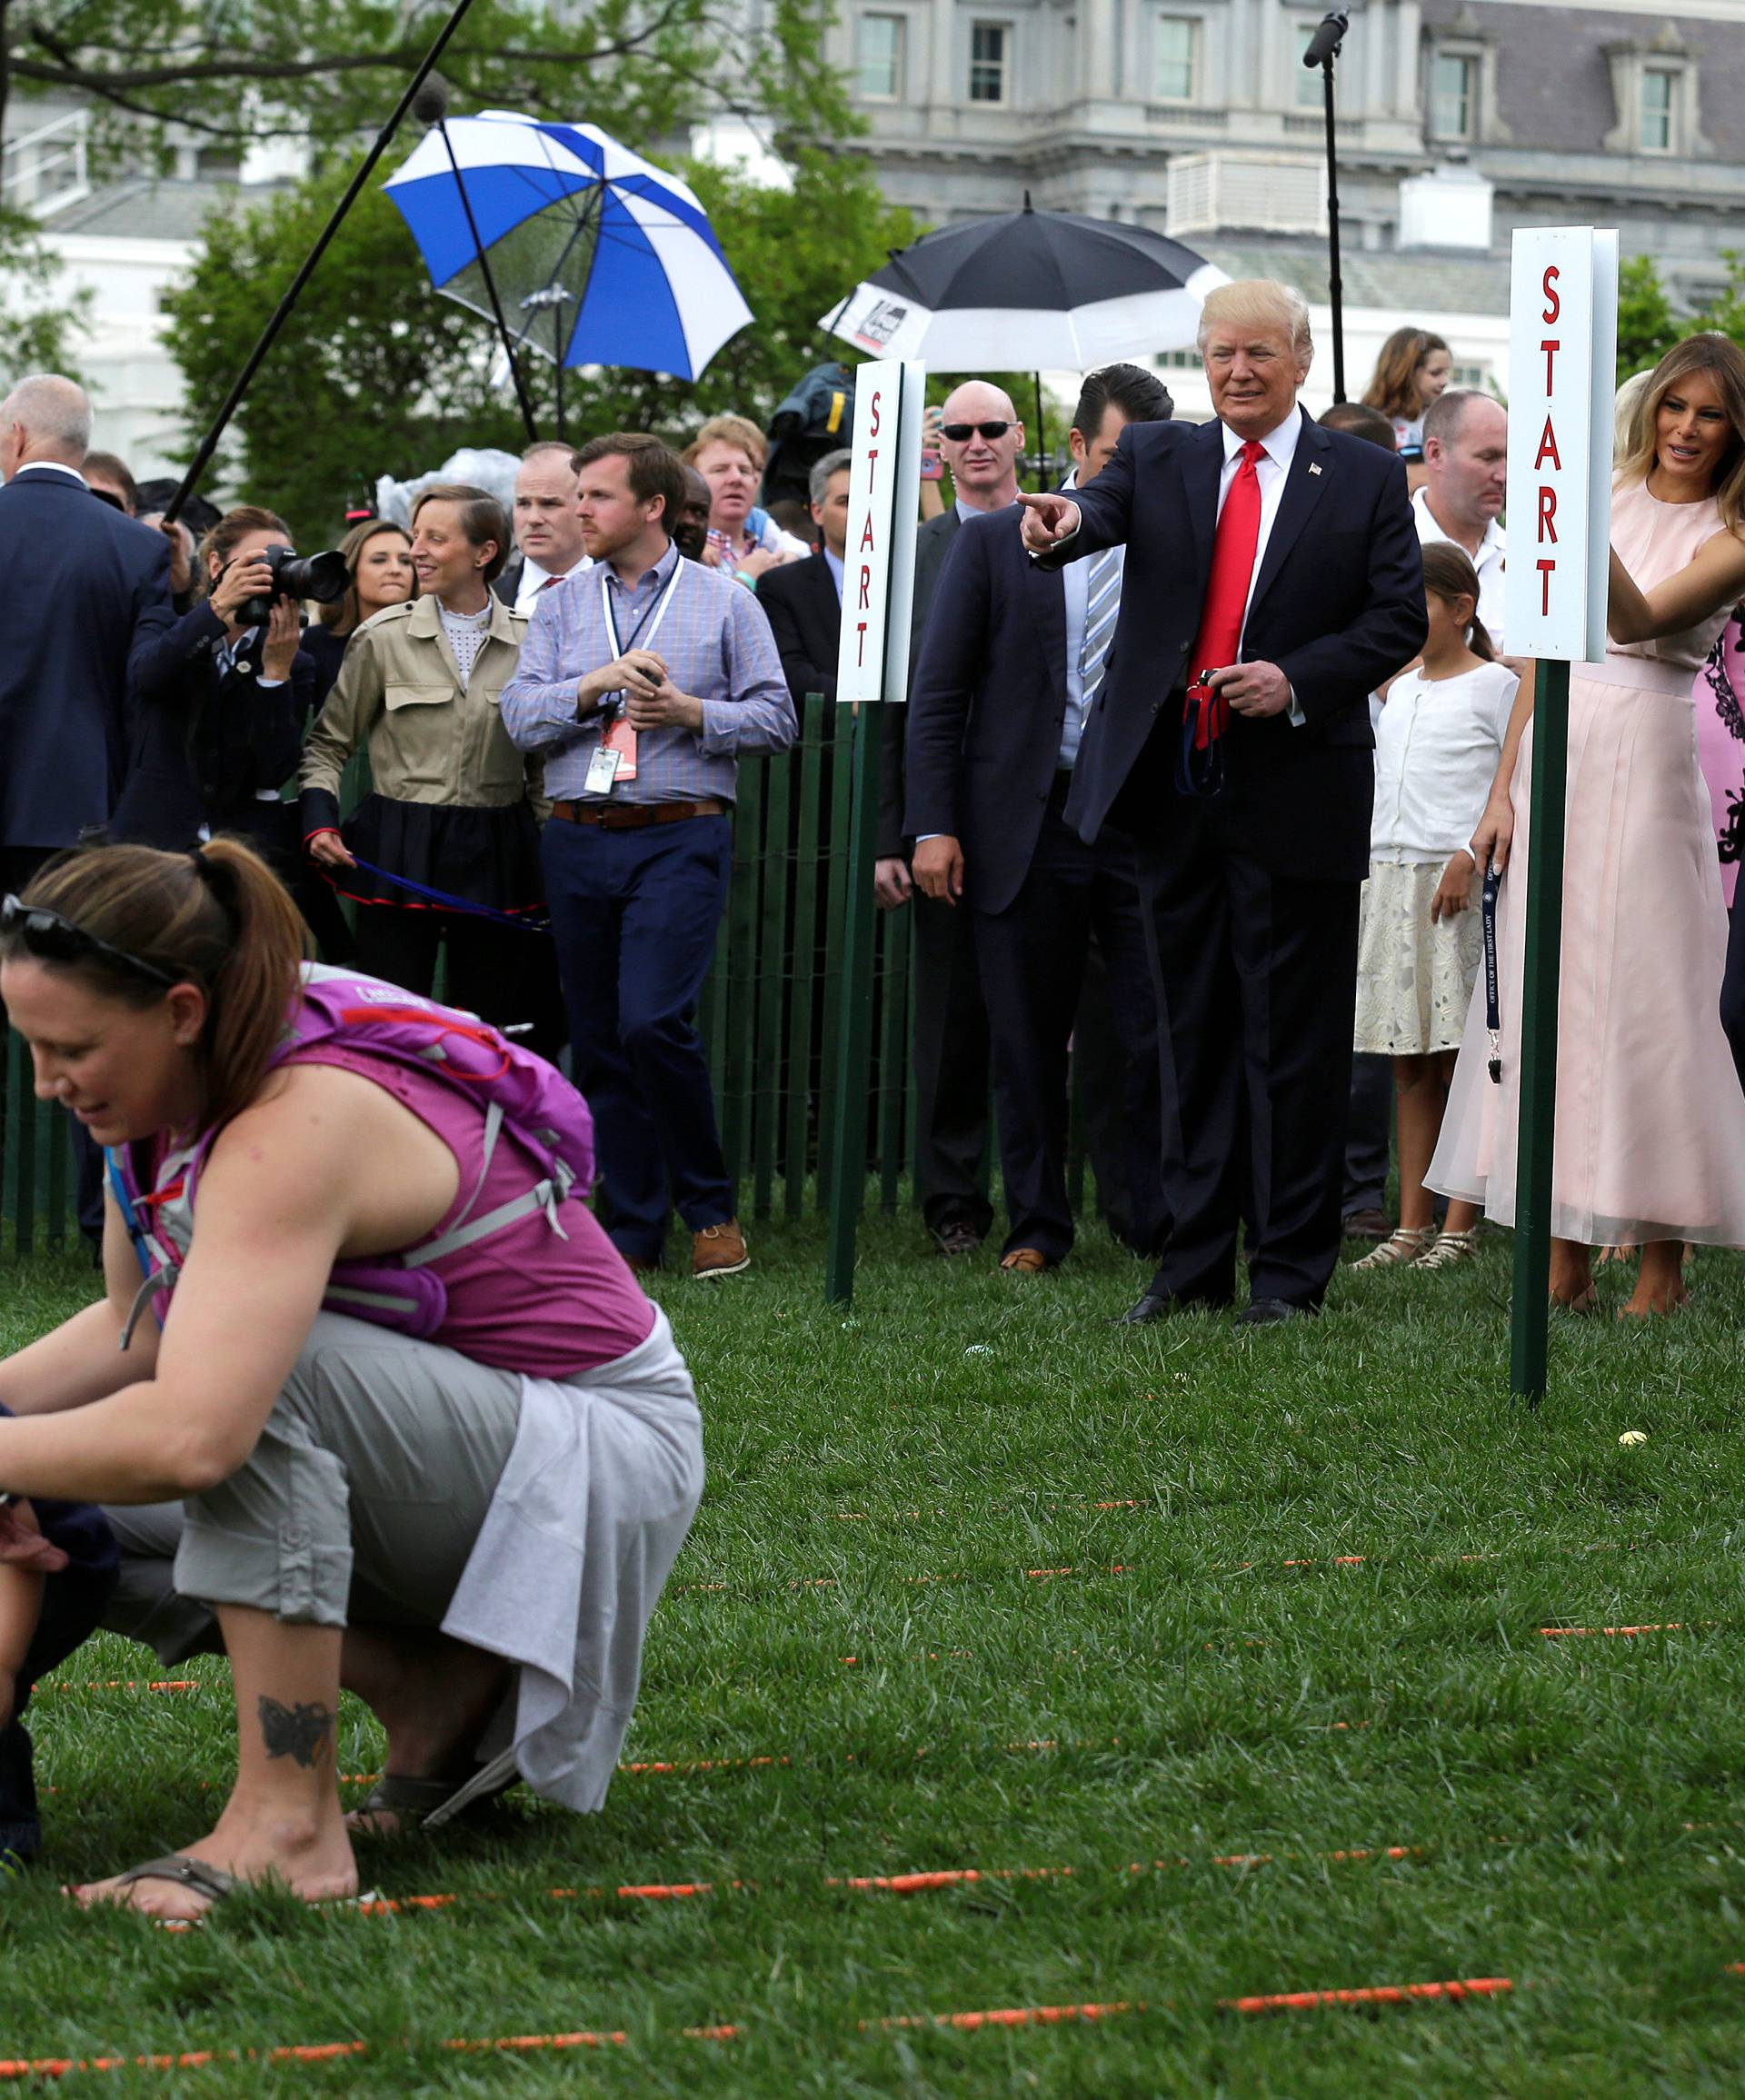 U.S. President Donald Trump, U.S. first lady Melania Trump and their son Barron watch as parents help their children during the 139th annual White House Easter Egg Roll on the South Lawn of the White House in Washington